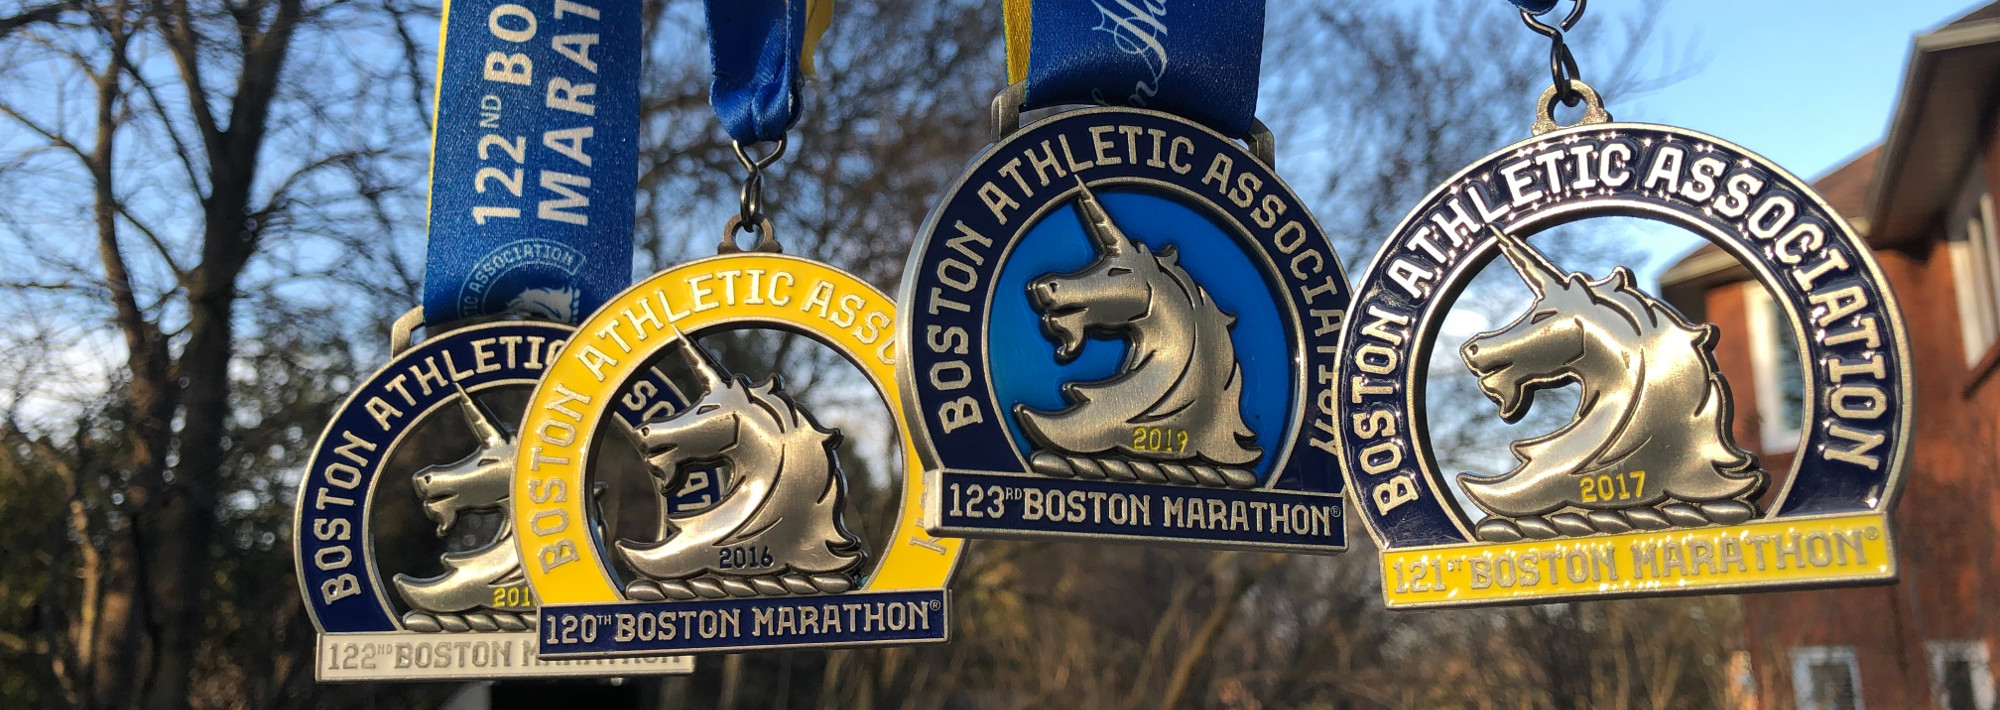 A row of blue and gold medals for the Boston Marathon